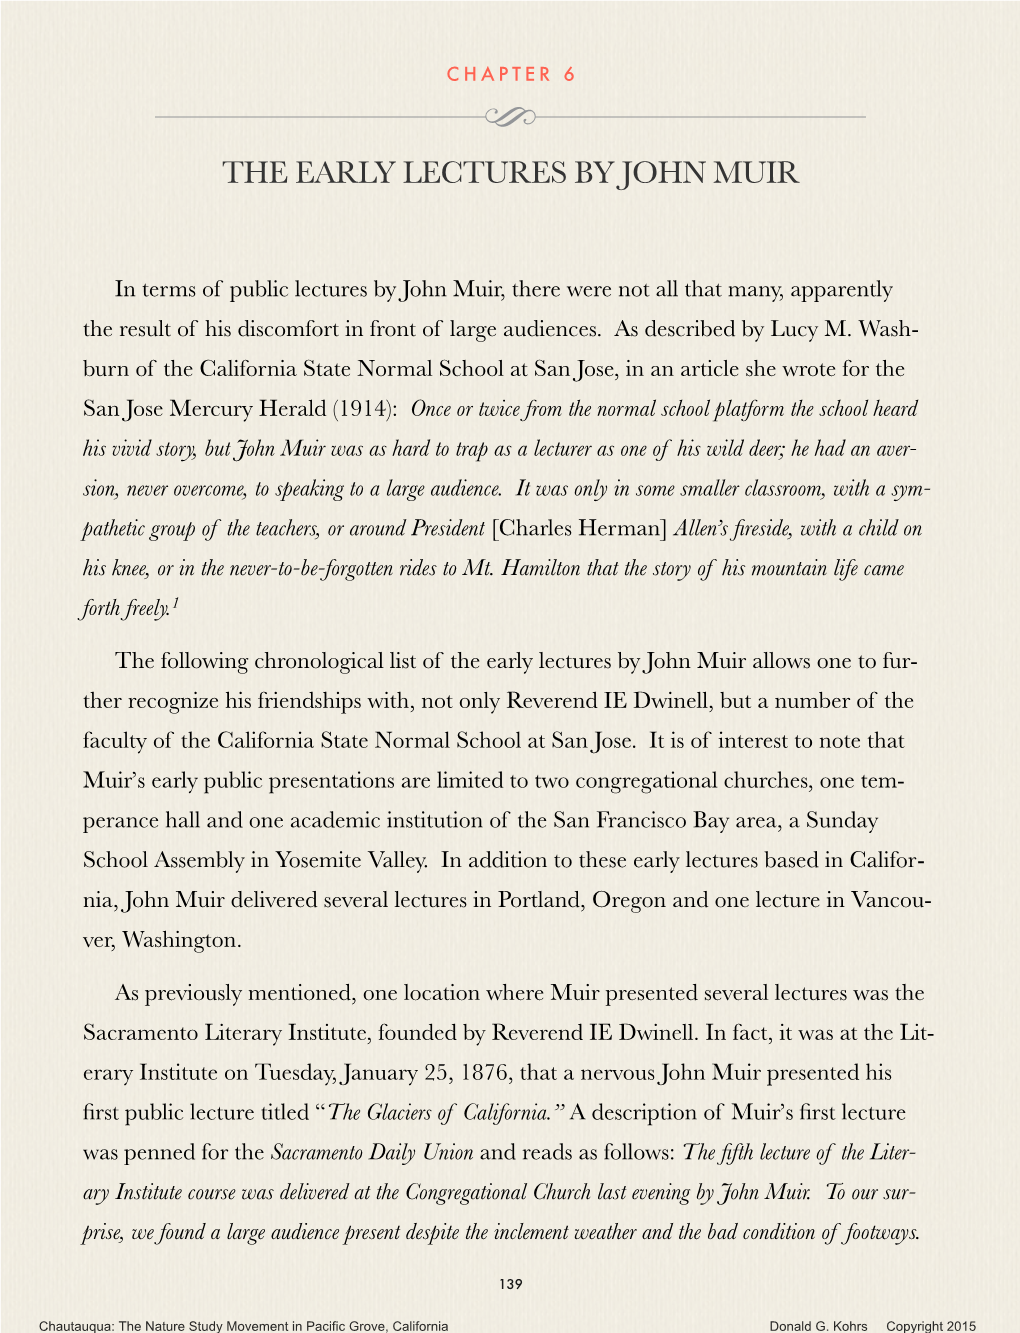 The Early Lectures by John Muir